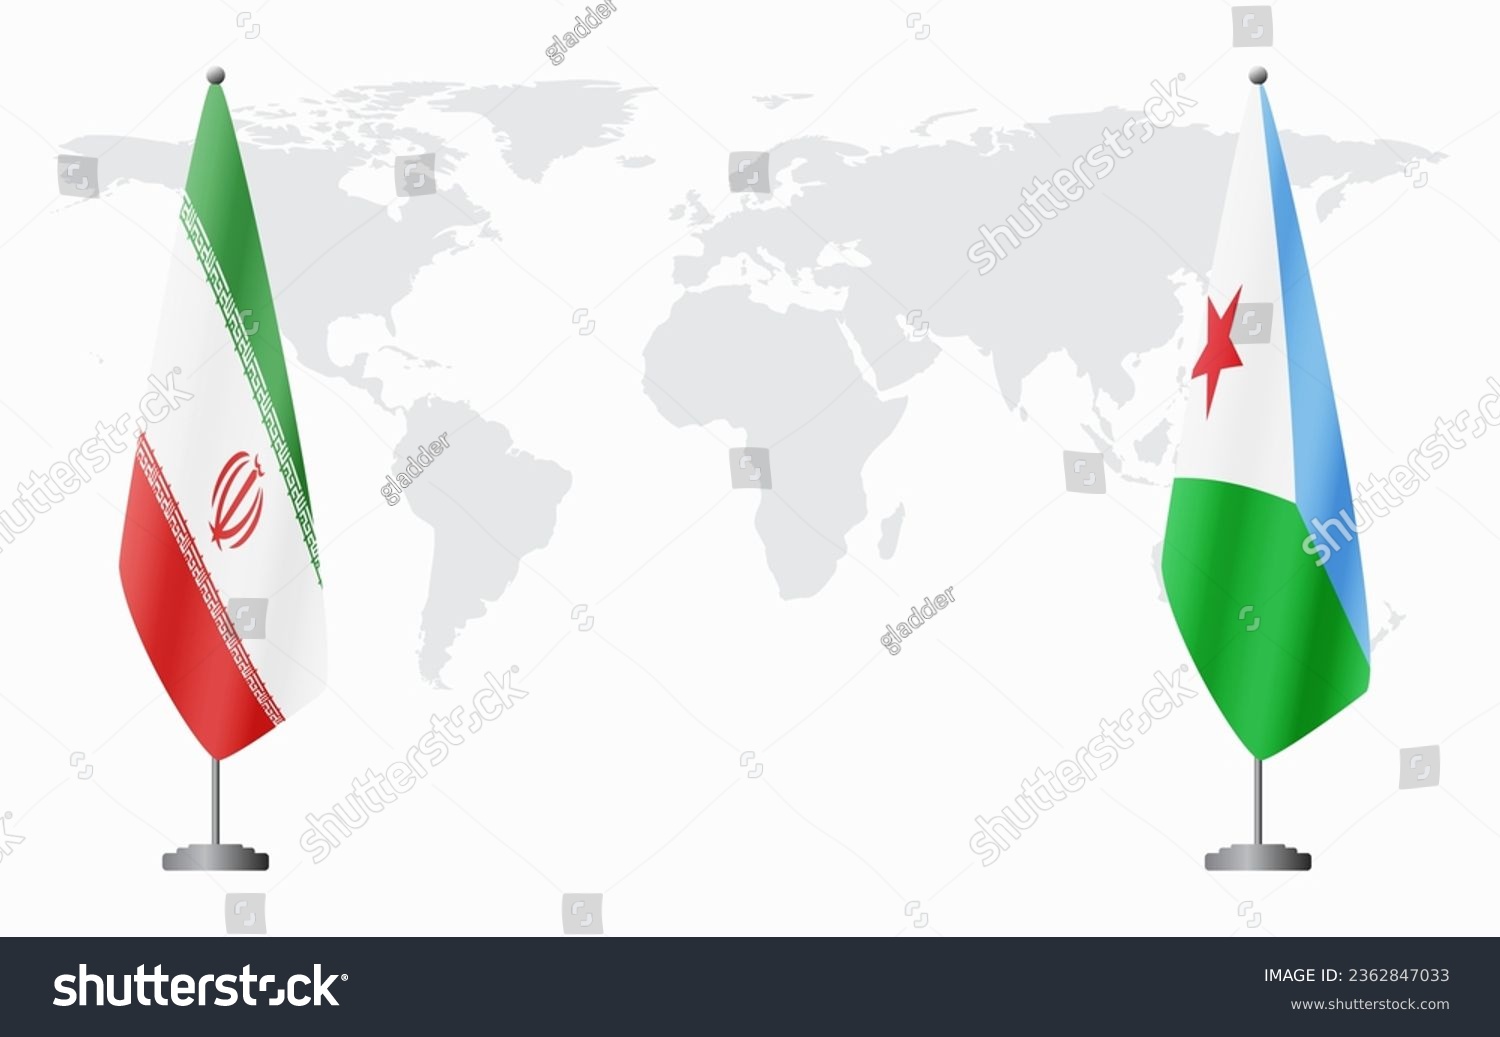 SVG of Iran and Djibouti flags for official meeting against background of world map. svg